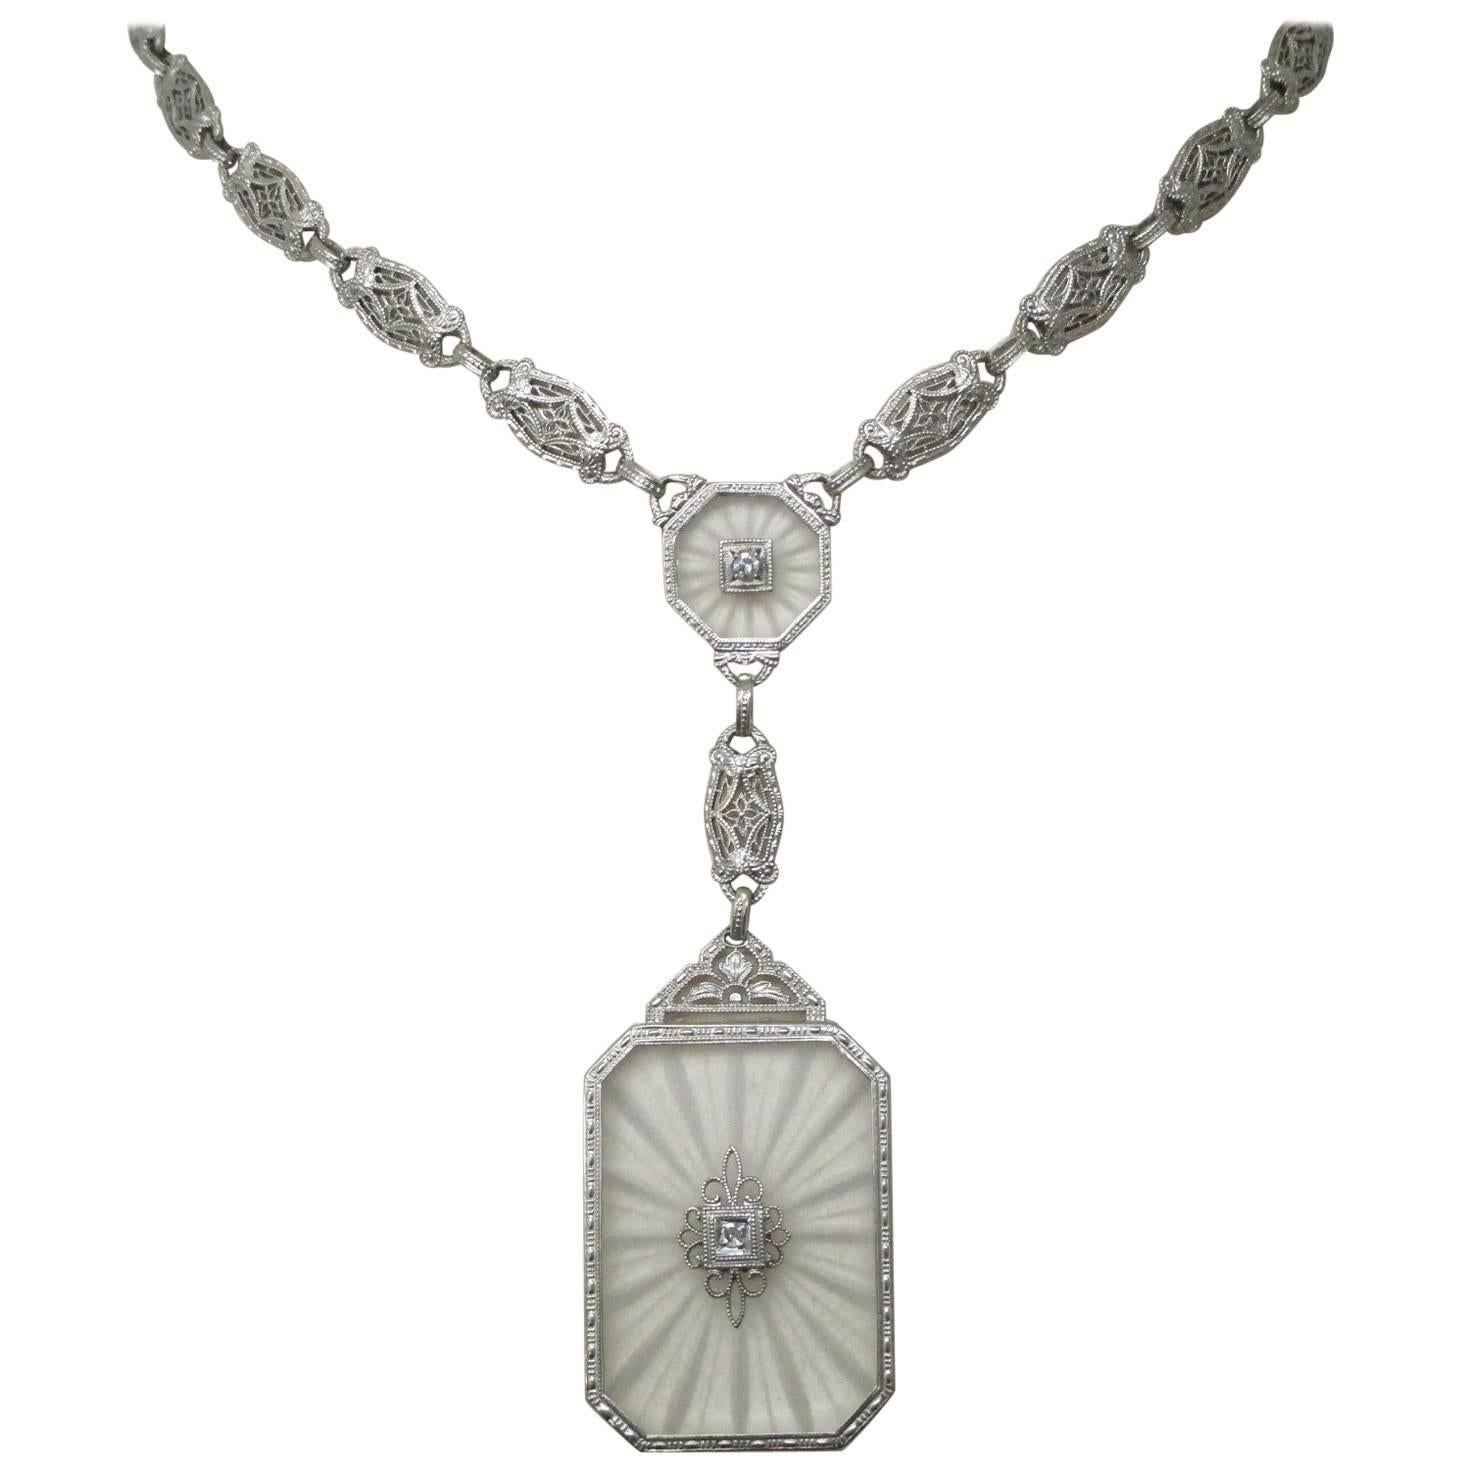 From an age of delicate beauty comes this extraordinary piece of art. Carved quartz, with single cut diamonds at the center of each station, makes this necklace a standout, as most of the jewelry made like this, used glass and rhinestones. You won't